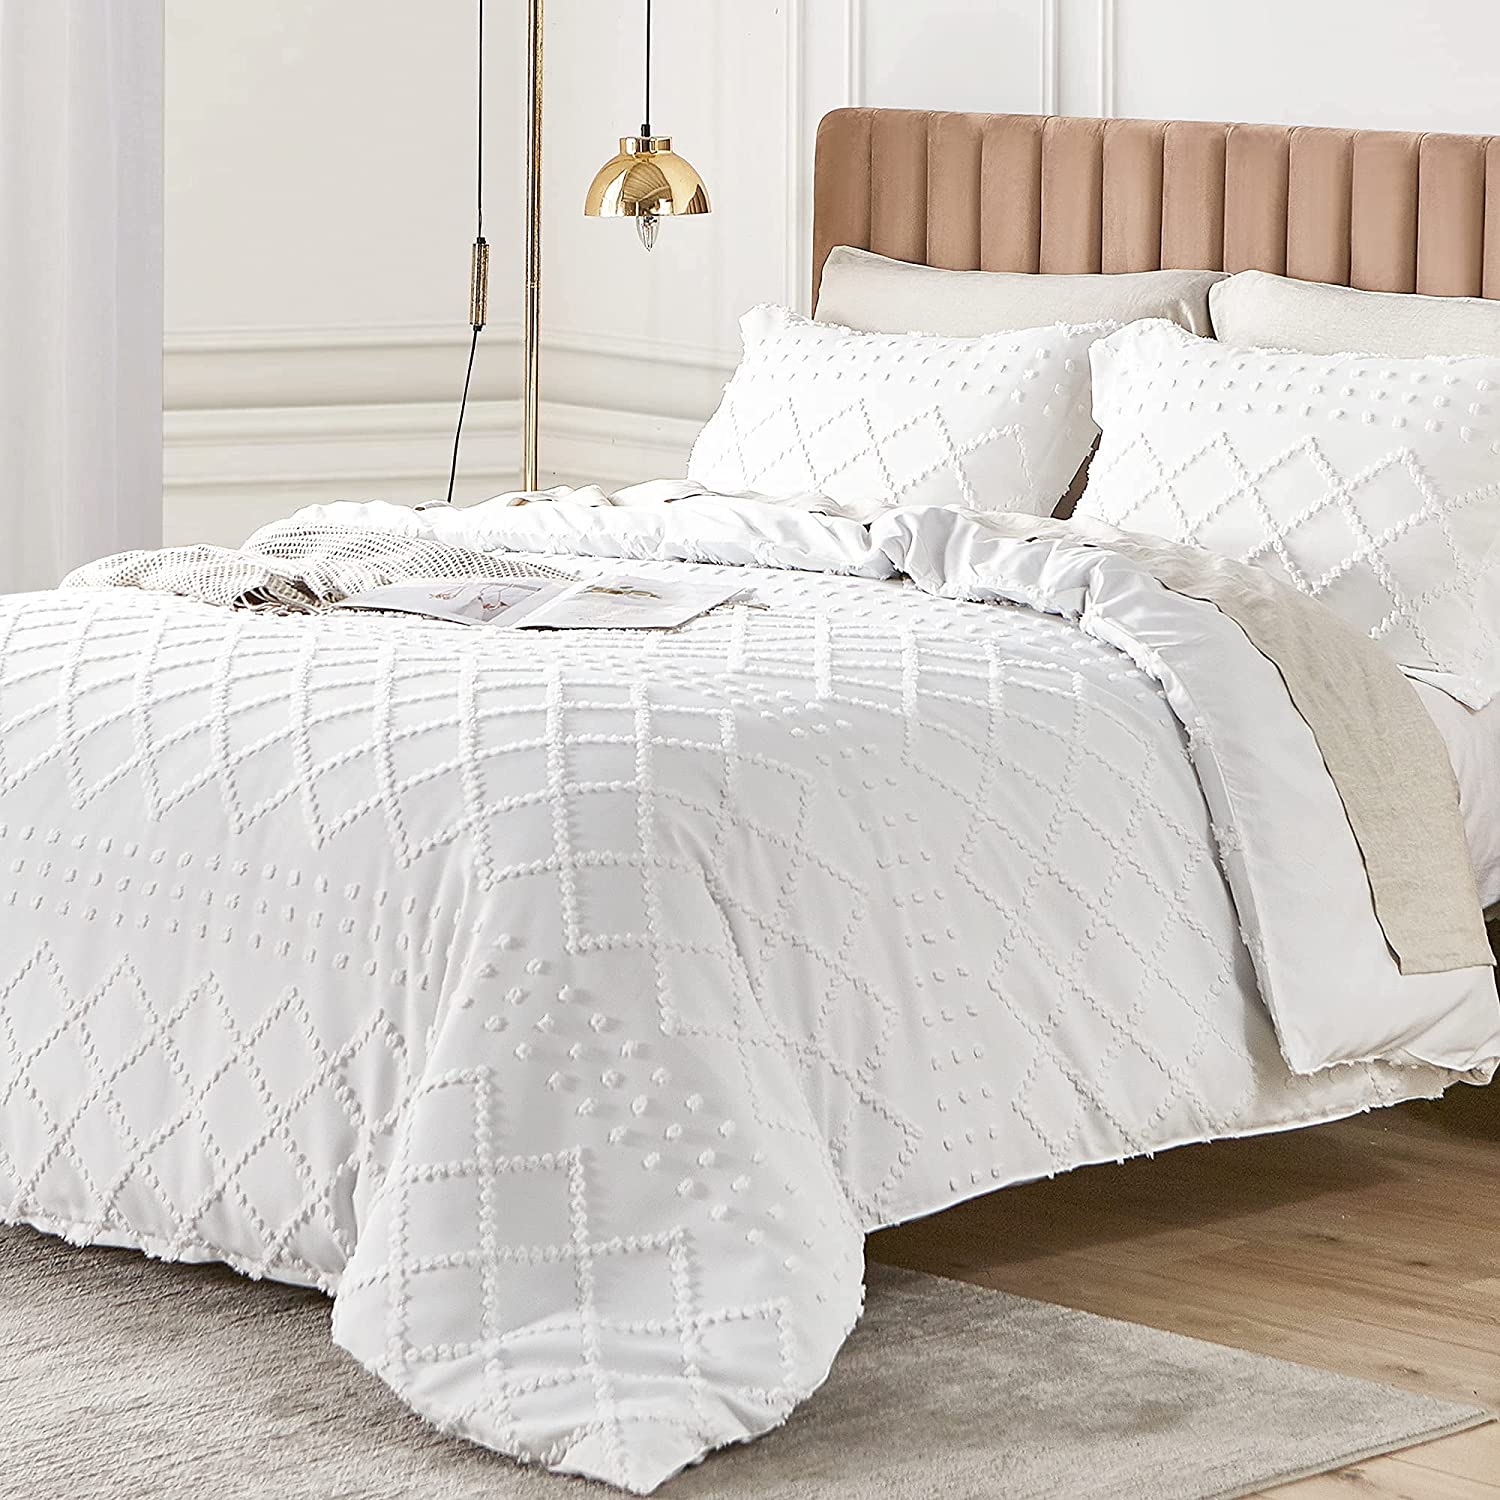 Price:$49.99  Embroidery Duvet Cover King Size, 3 Pieces Soft Brushed Microfiber Shabby Chic Boho Comforter Cover Set, Durable Lightweight Summer Bedding Set (King, White) : Home & Kitchen